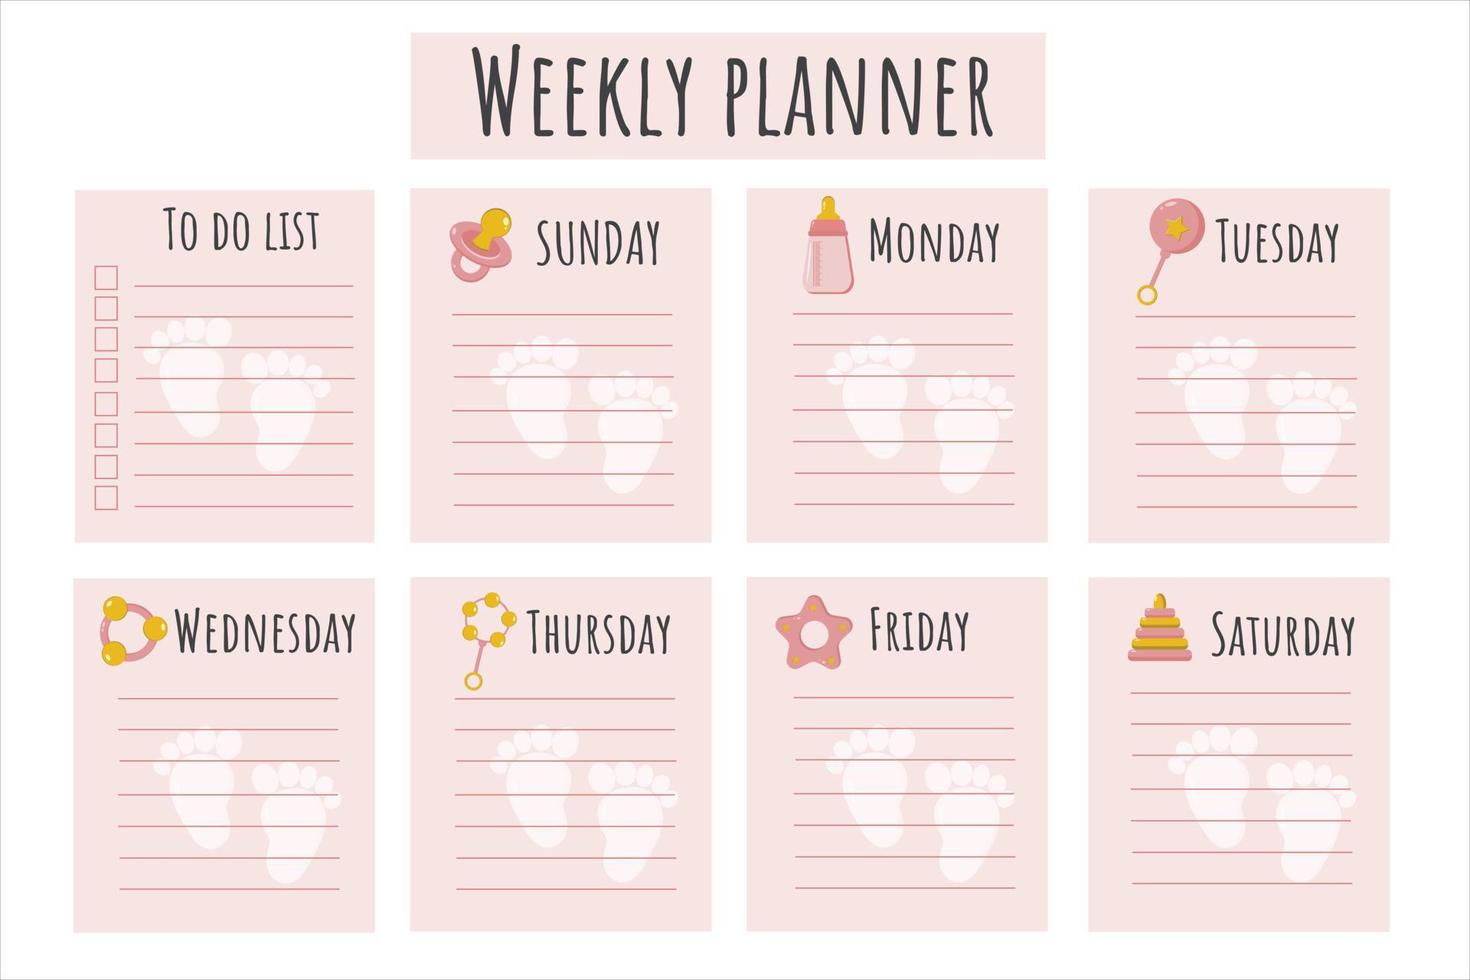 Schedule for the baby's mom. Schedule for the week for the girl's mother. A place to take notes, organizer for the day of the week for planning. Young mom's schedule. Weekly planner for mom. vector